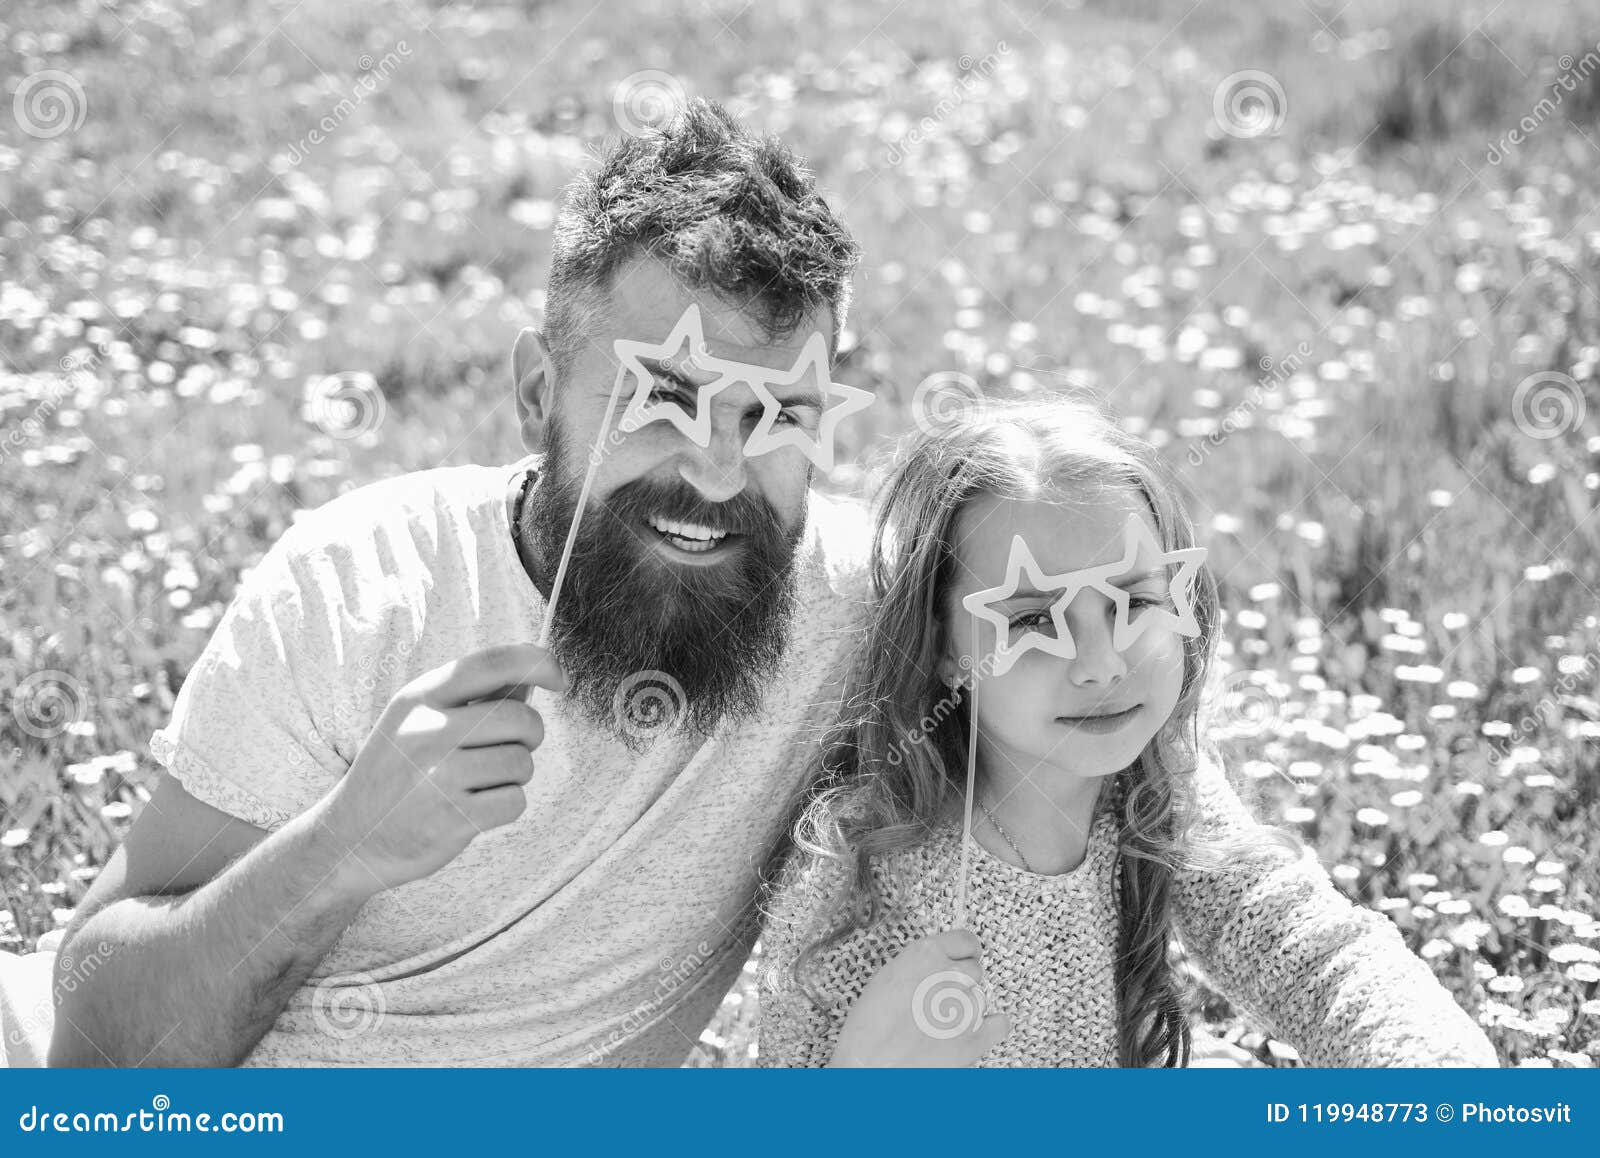 child and dad posing with star d eyeglases photo booth attribute at meadow. father and daughter sits on grass at